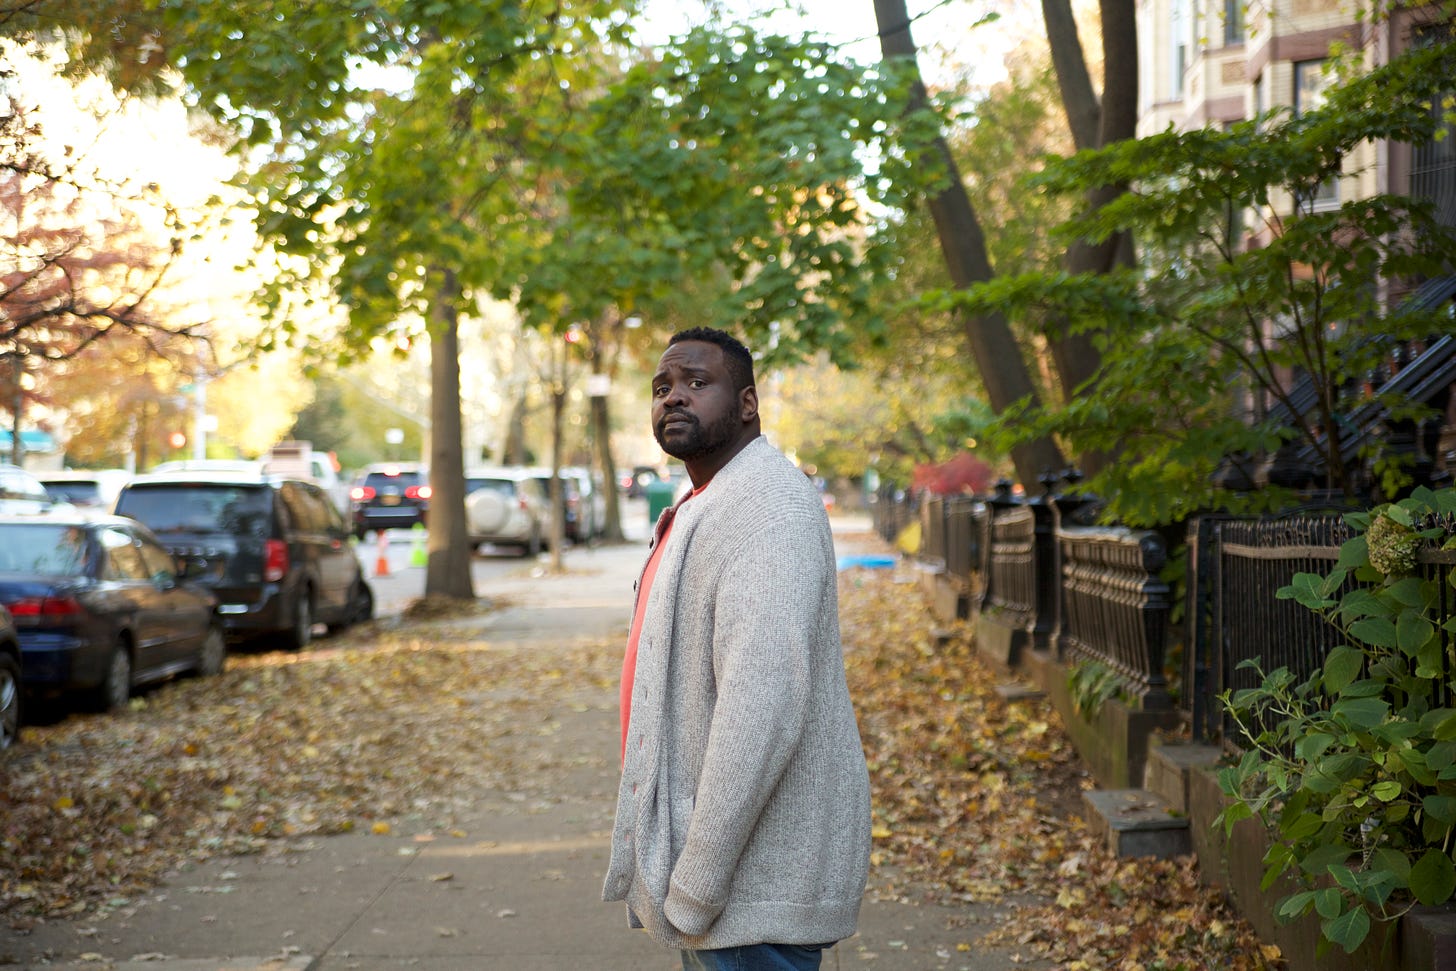 From the film "The Outside Story": A man looks back towards the camera, on a sunny day, as he ponders where to go down the sidewalk.